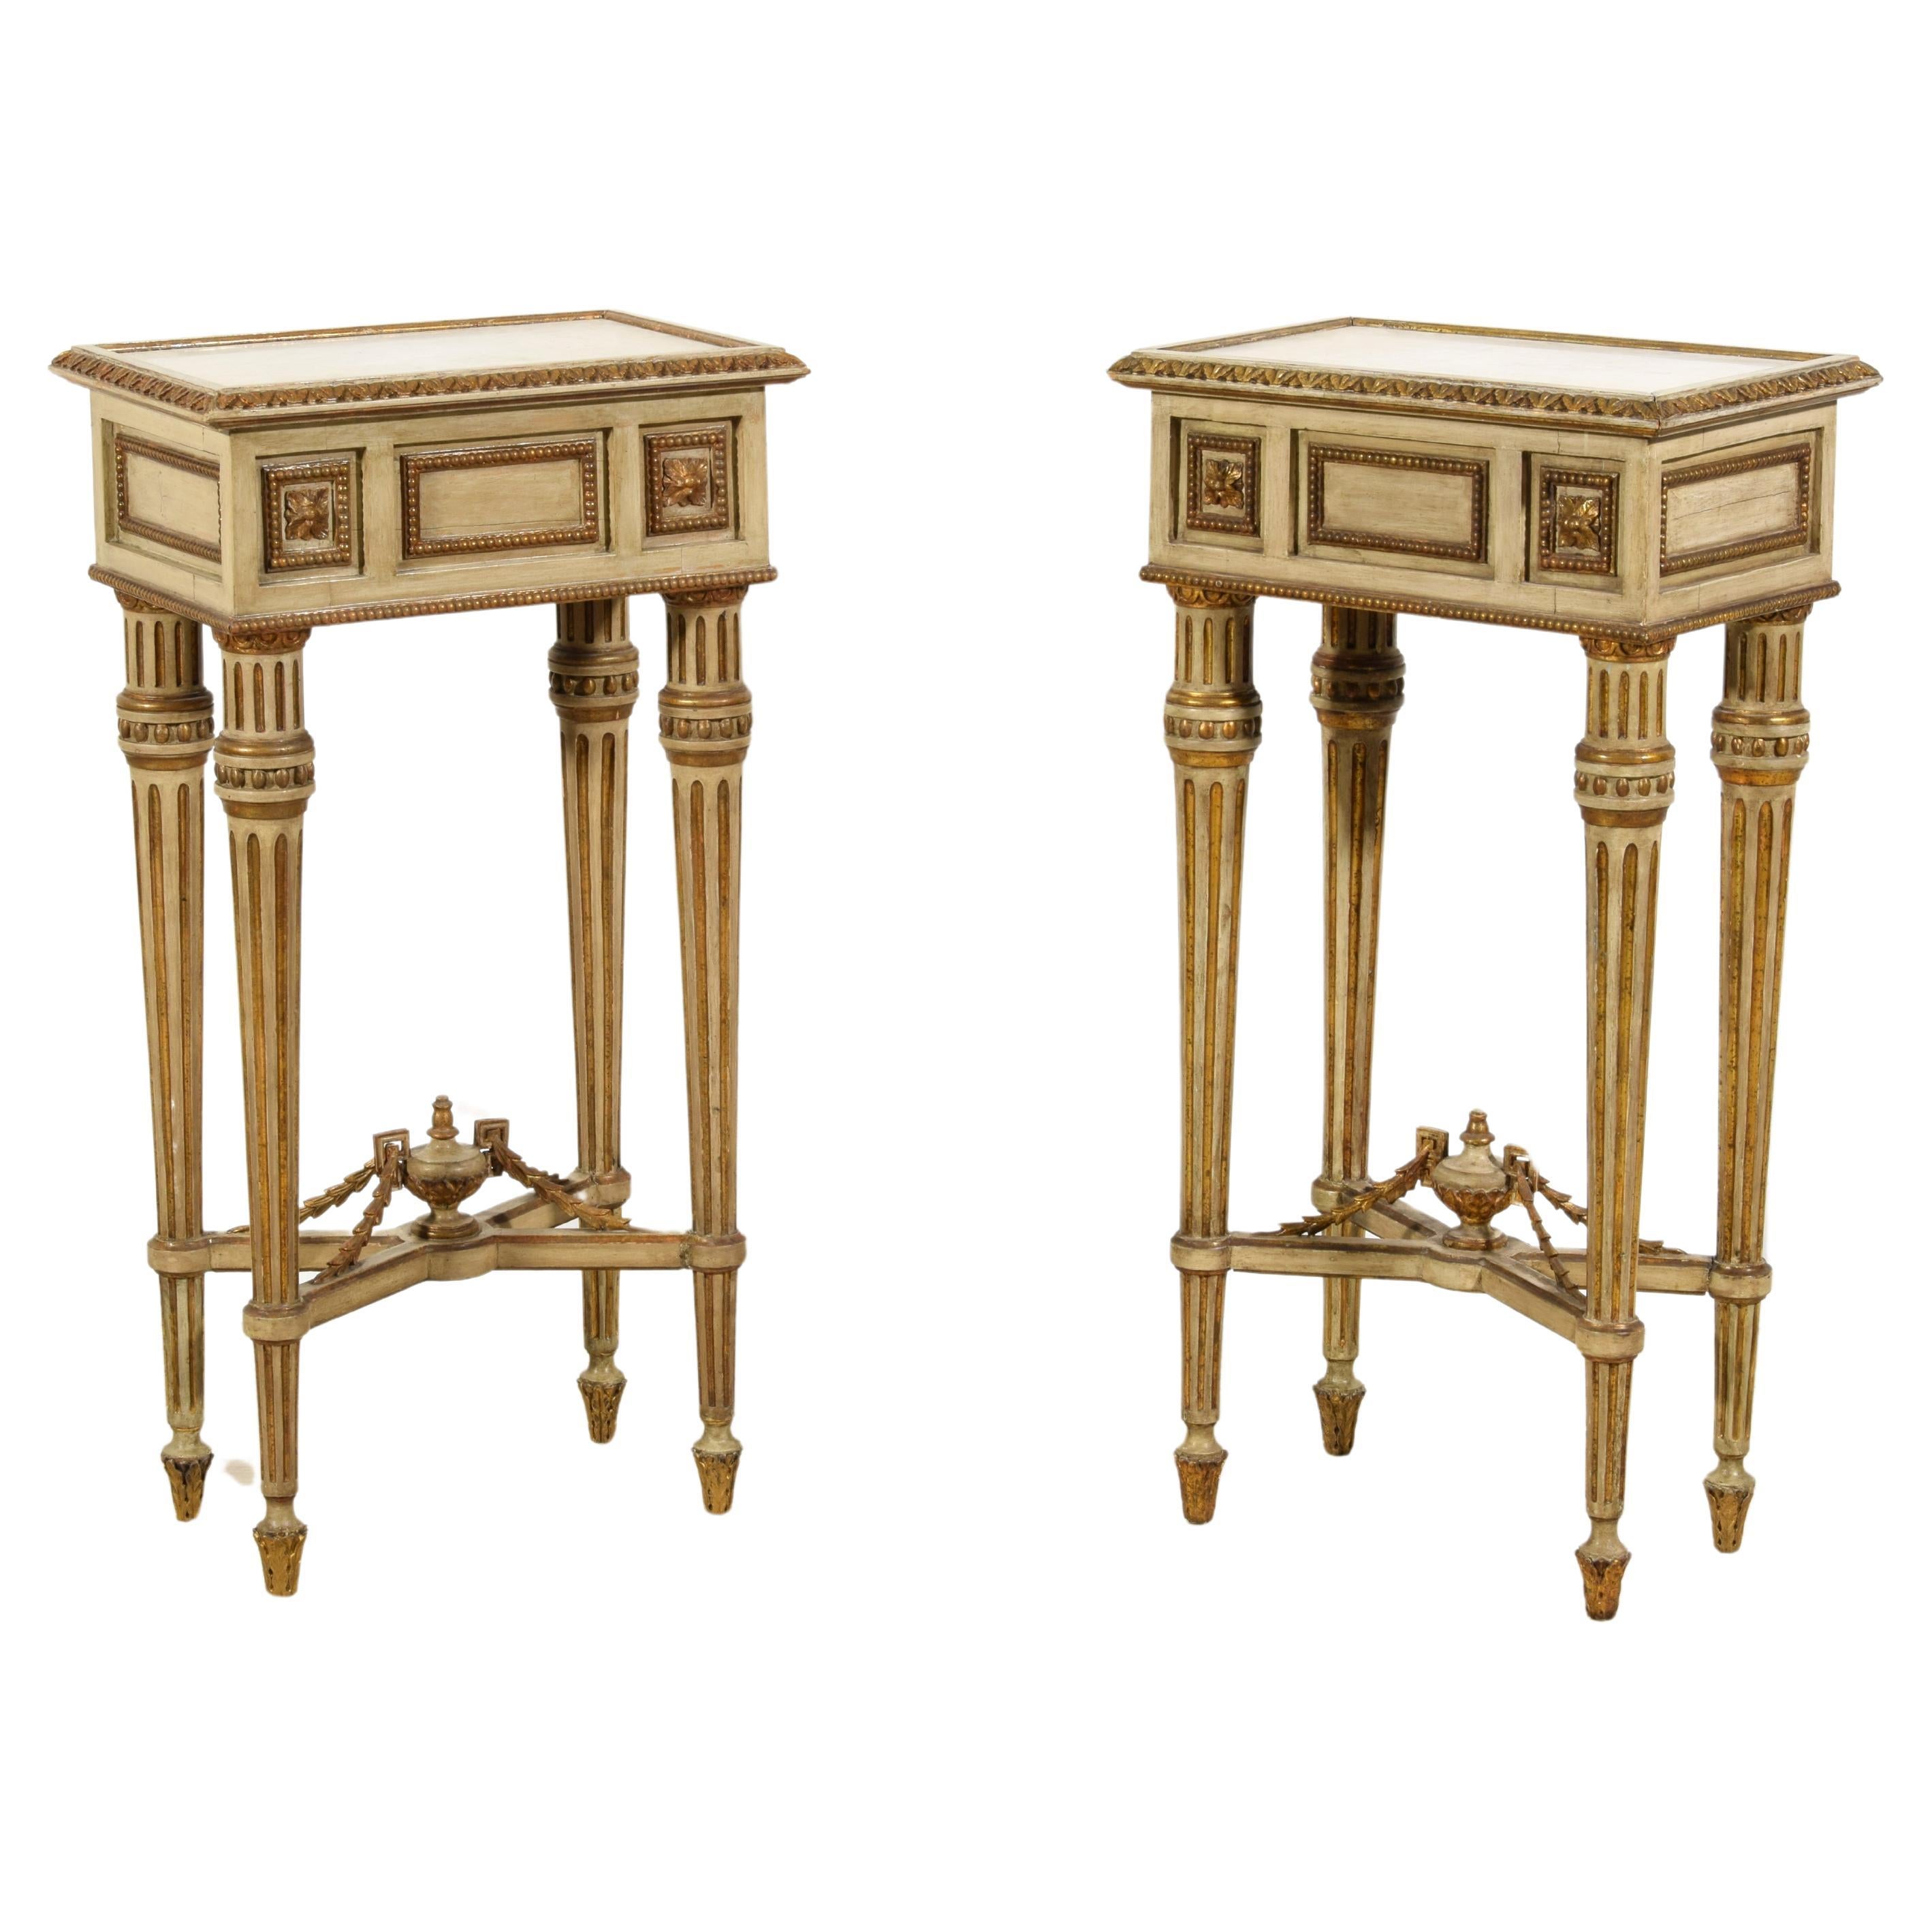 19th Century, Pair of Italian Louis XVI Style Lacquered Wood Central Tables 